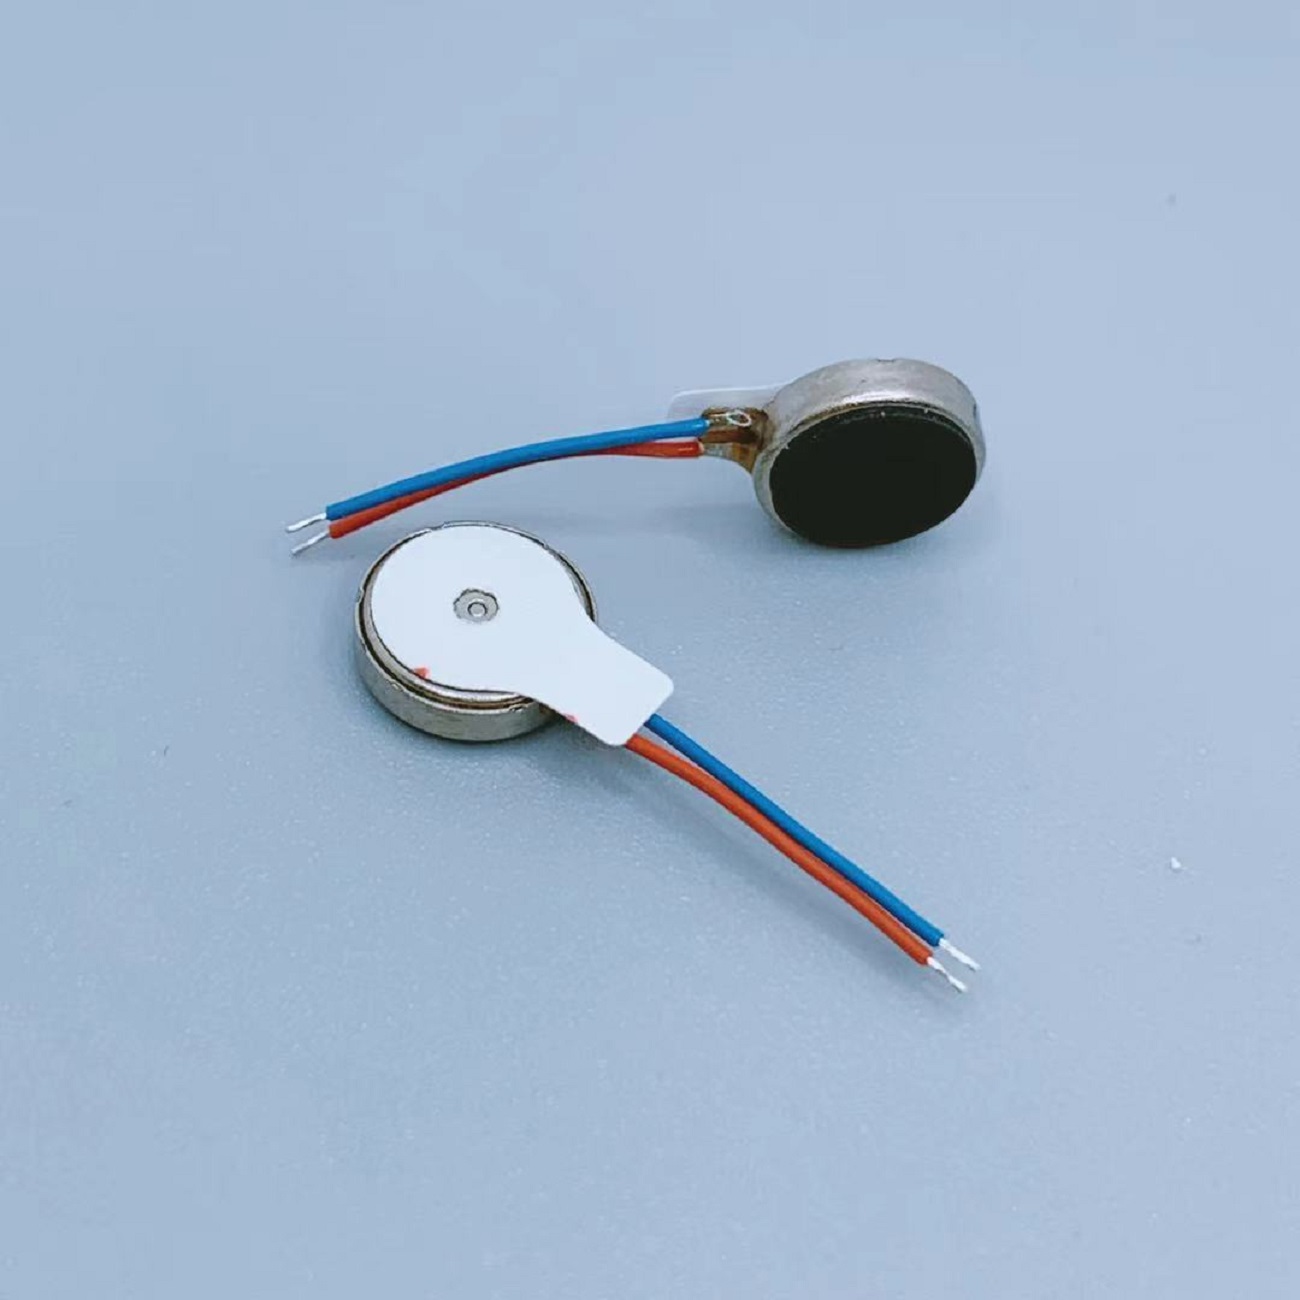 Factory made hot-sale DC Permanent Magnet Mini Vibrating Level Motor -
 Dia 8mm*2.0mm Cell Vibrating Motor | Micro Vibrator | LEADER LCM-0820 – Leader Microelectronics